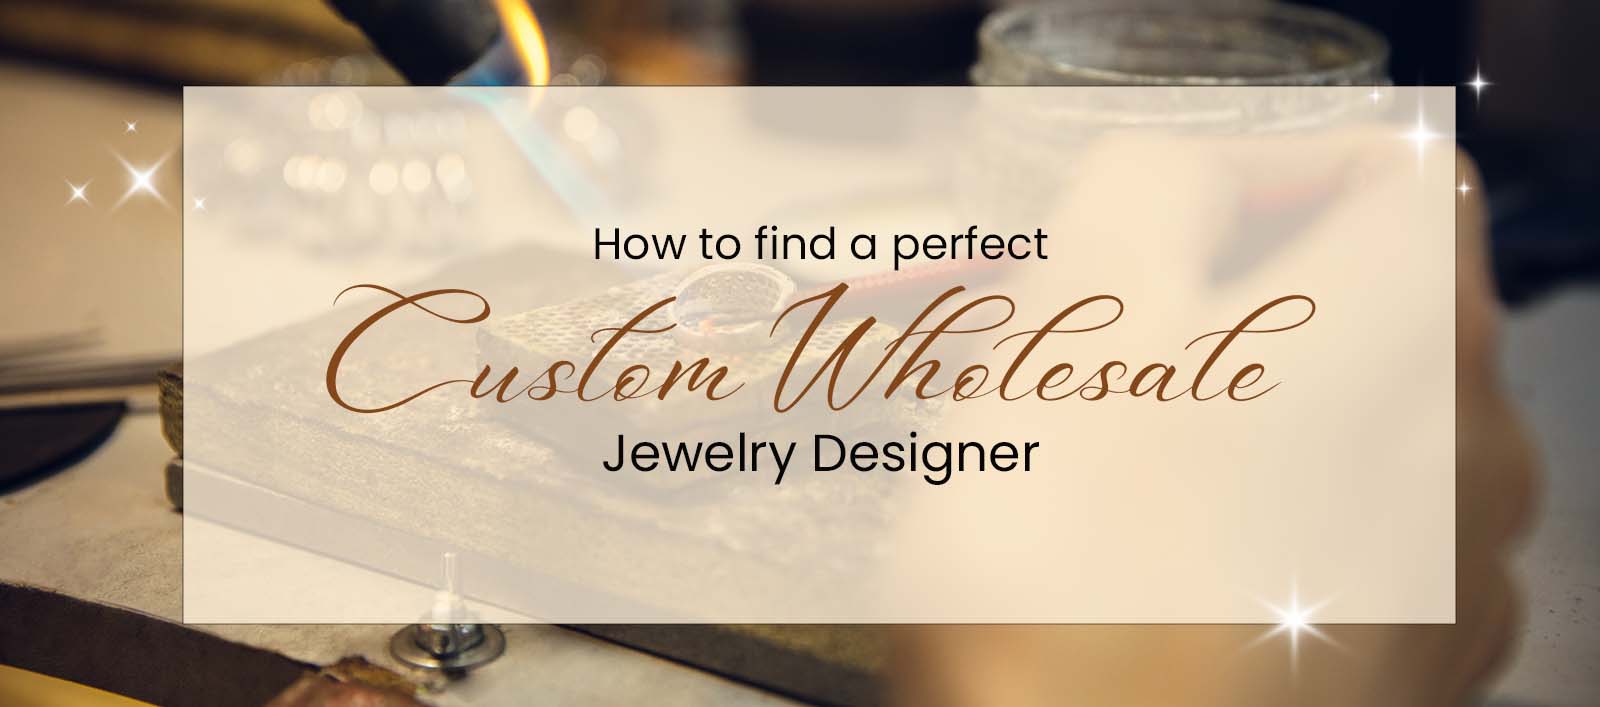 How to Find a Perfect Custom Wholesaler Jewelry Designer